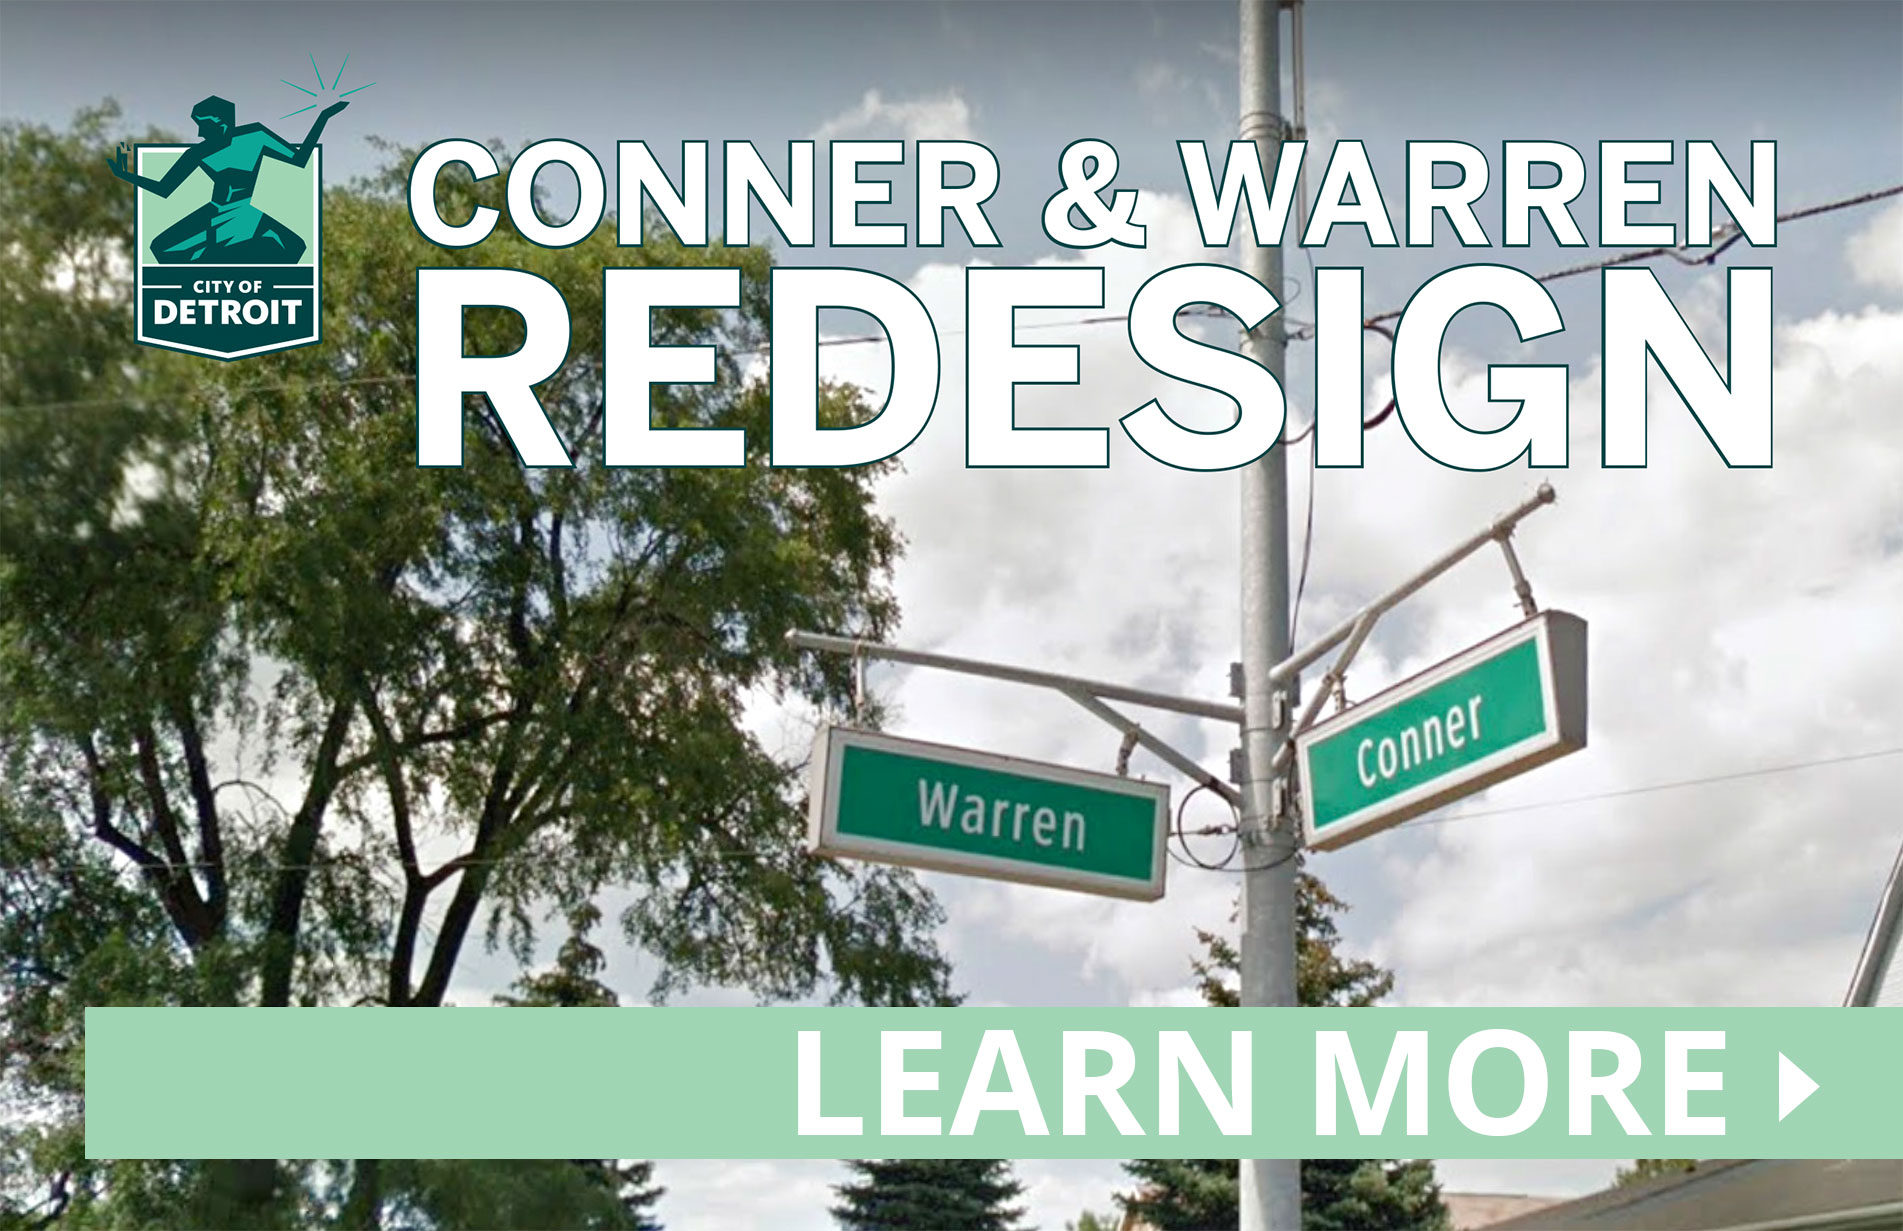 Learn more about the Conner Warren Redesign